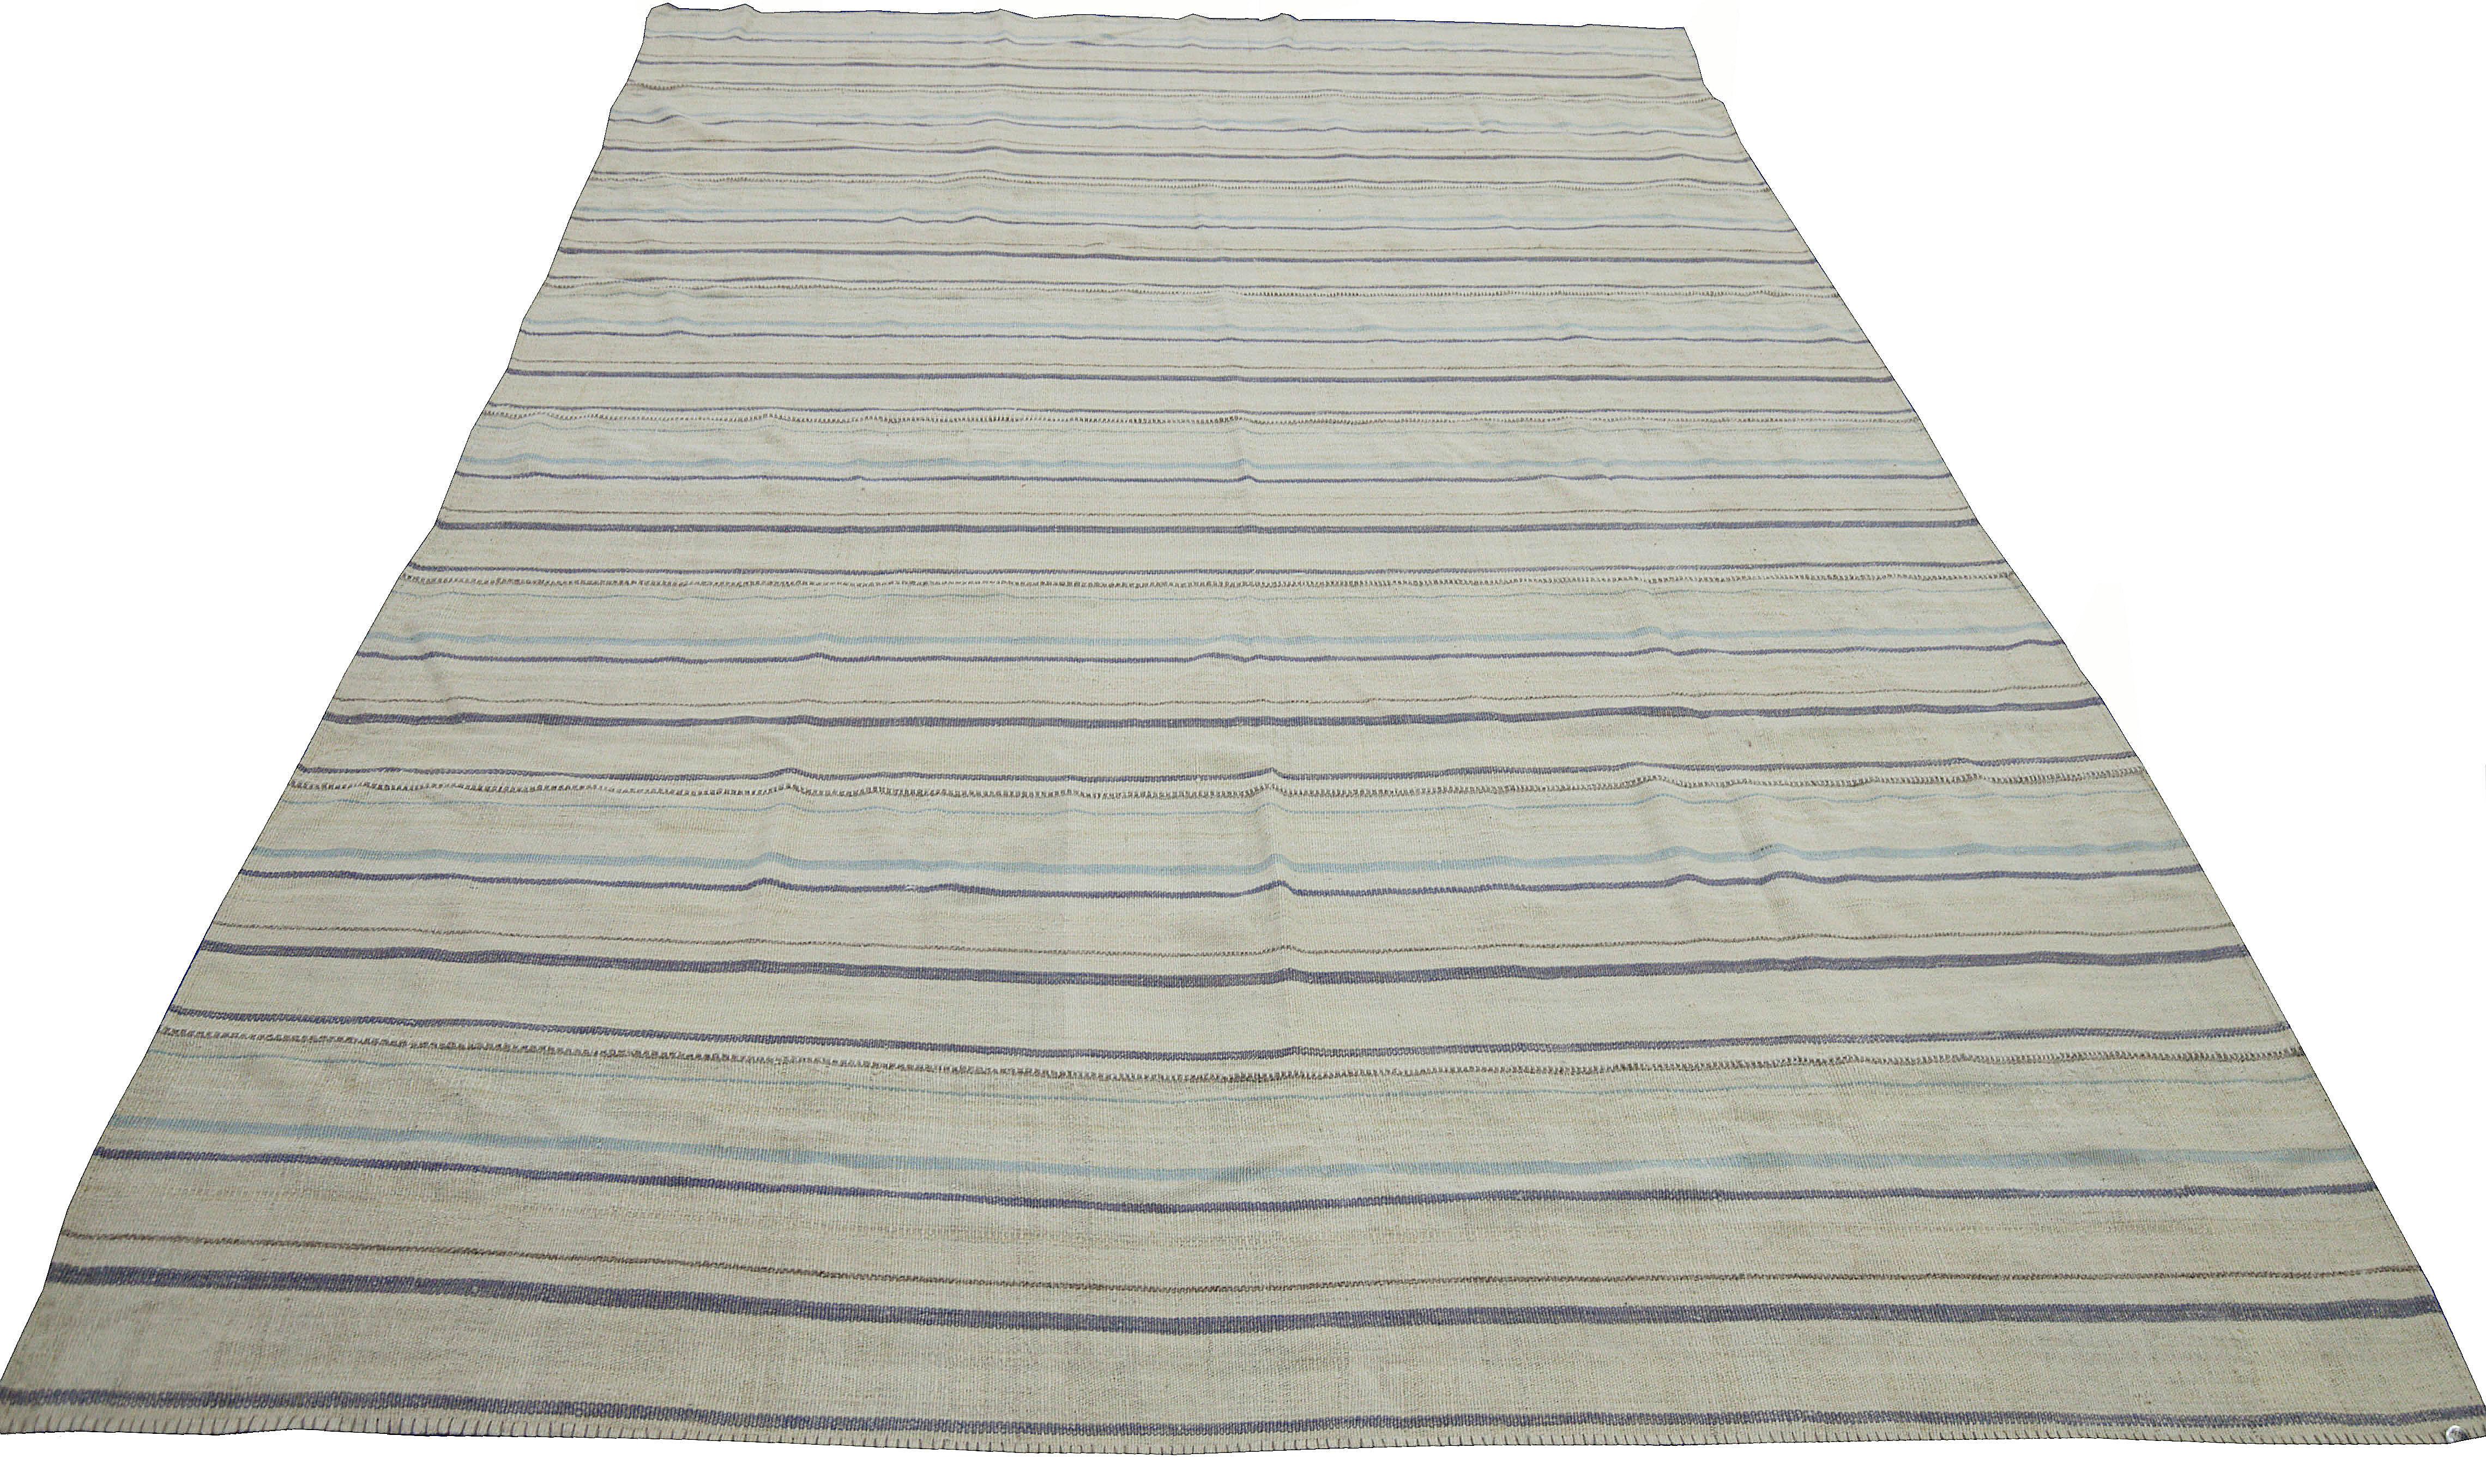 Hand-Woven Kilim Turkish Rug in Gray and Blue Stripes on Ivory Field For Sale